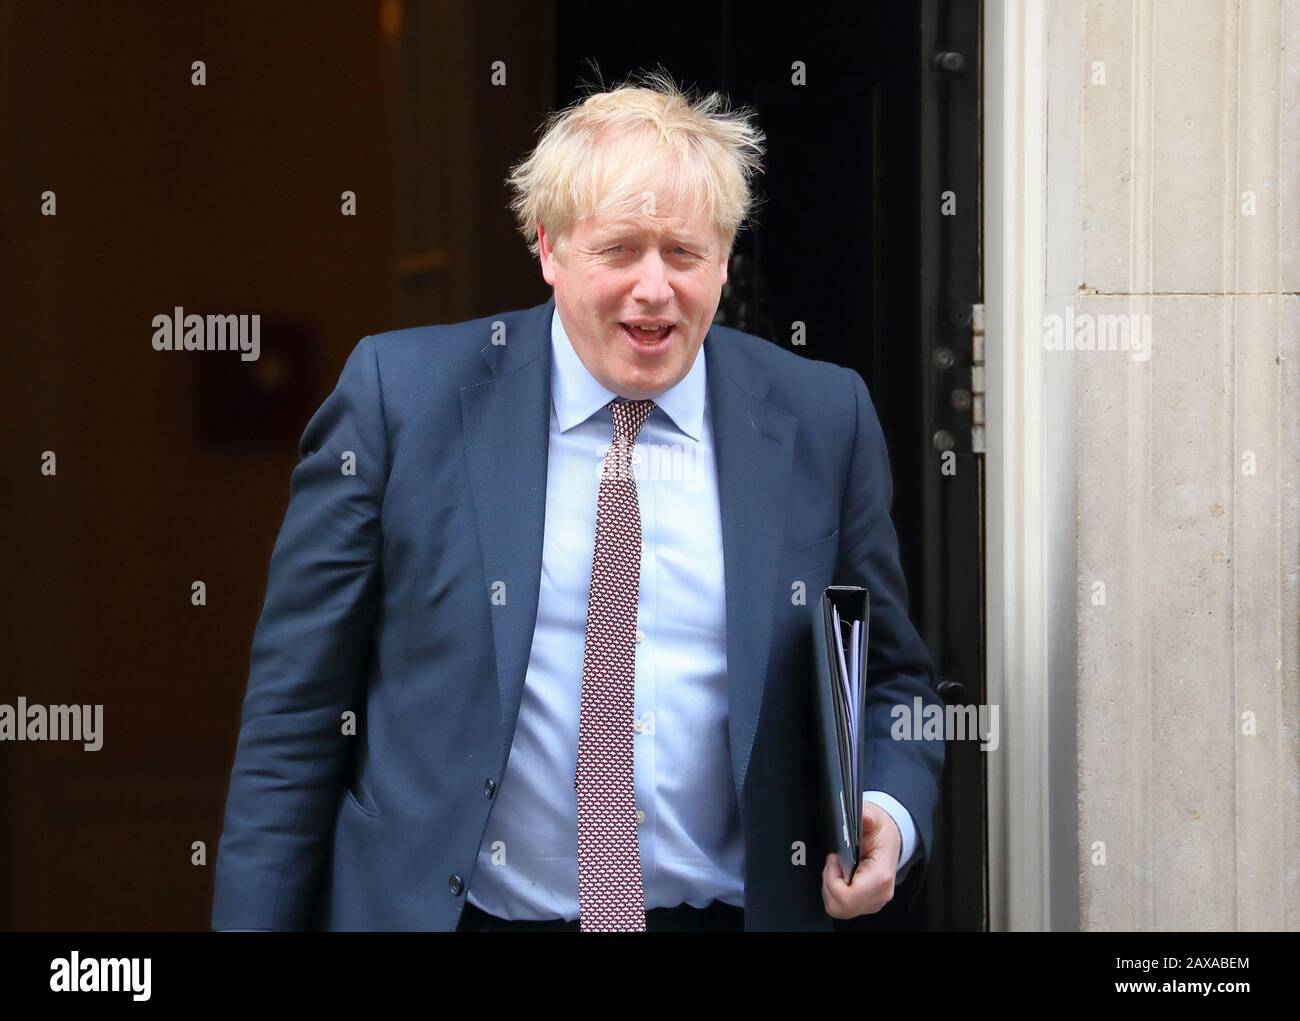 London, UK. 11th Feb, 2020. Upbeat Prime Minister Boris Johnson leaving Downing Street after the weekly Cabinet Meeting. Credit: Uwe Deffner/Alamy Live News Stock Photo